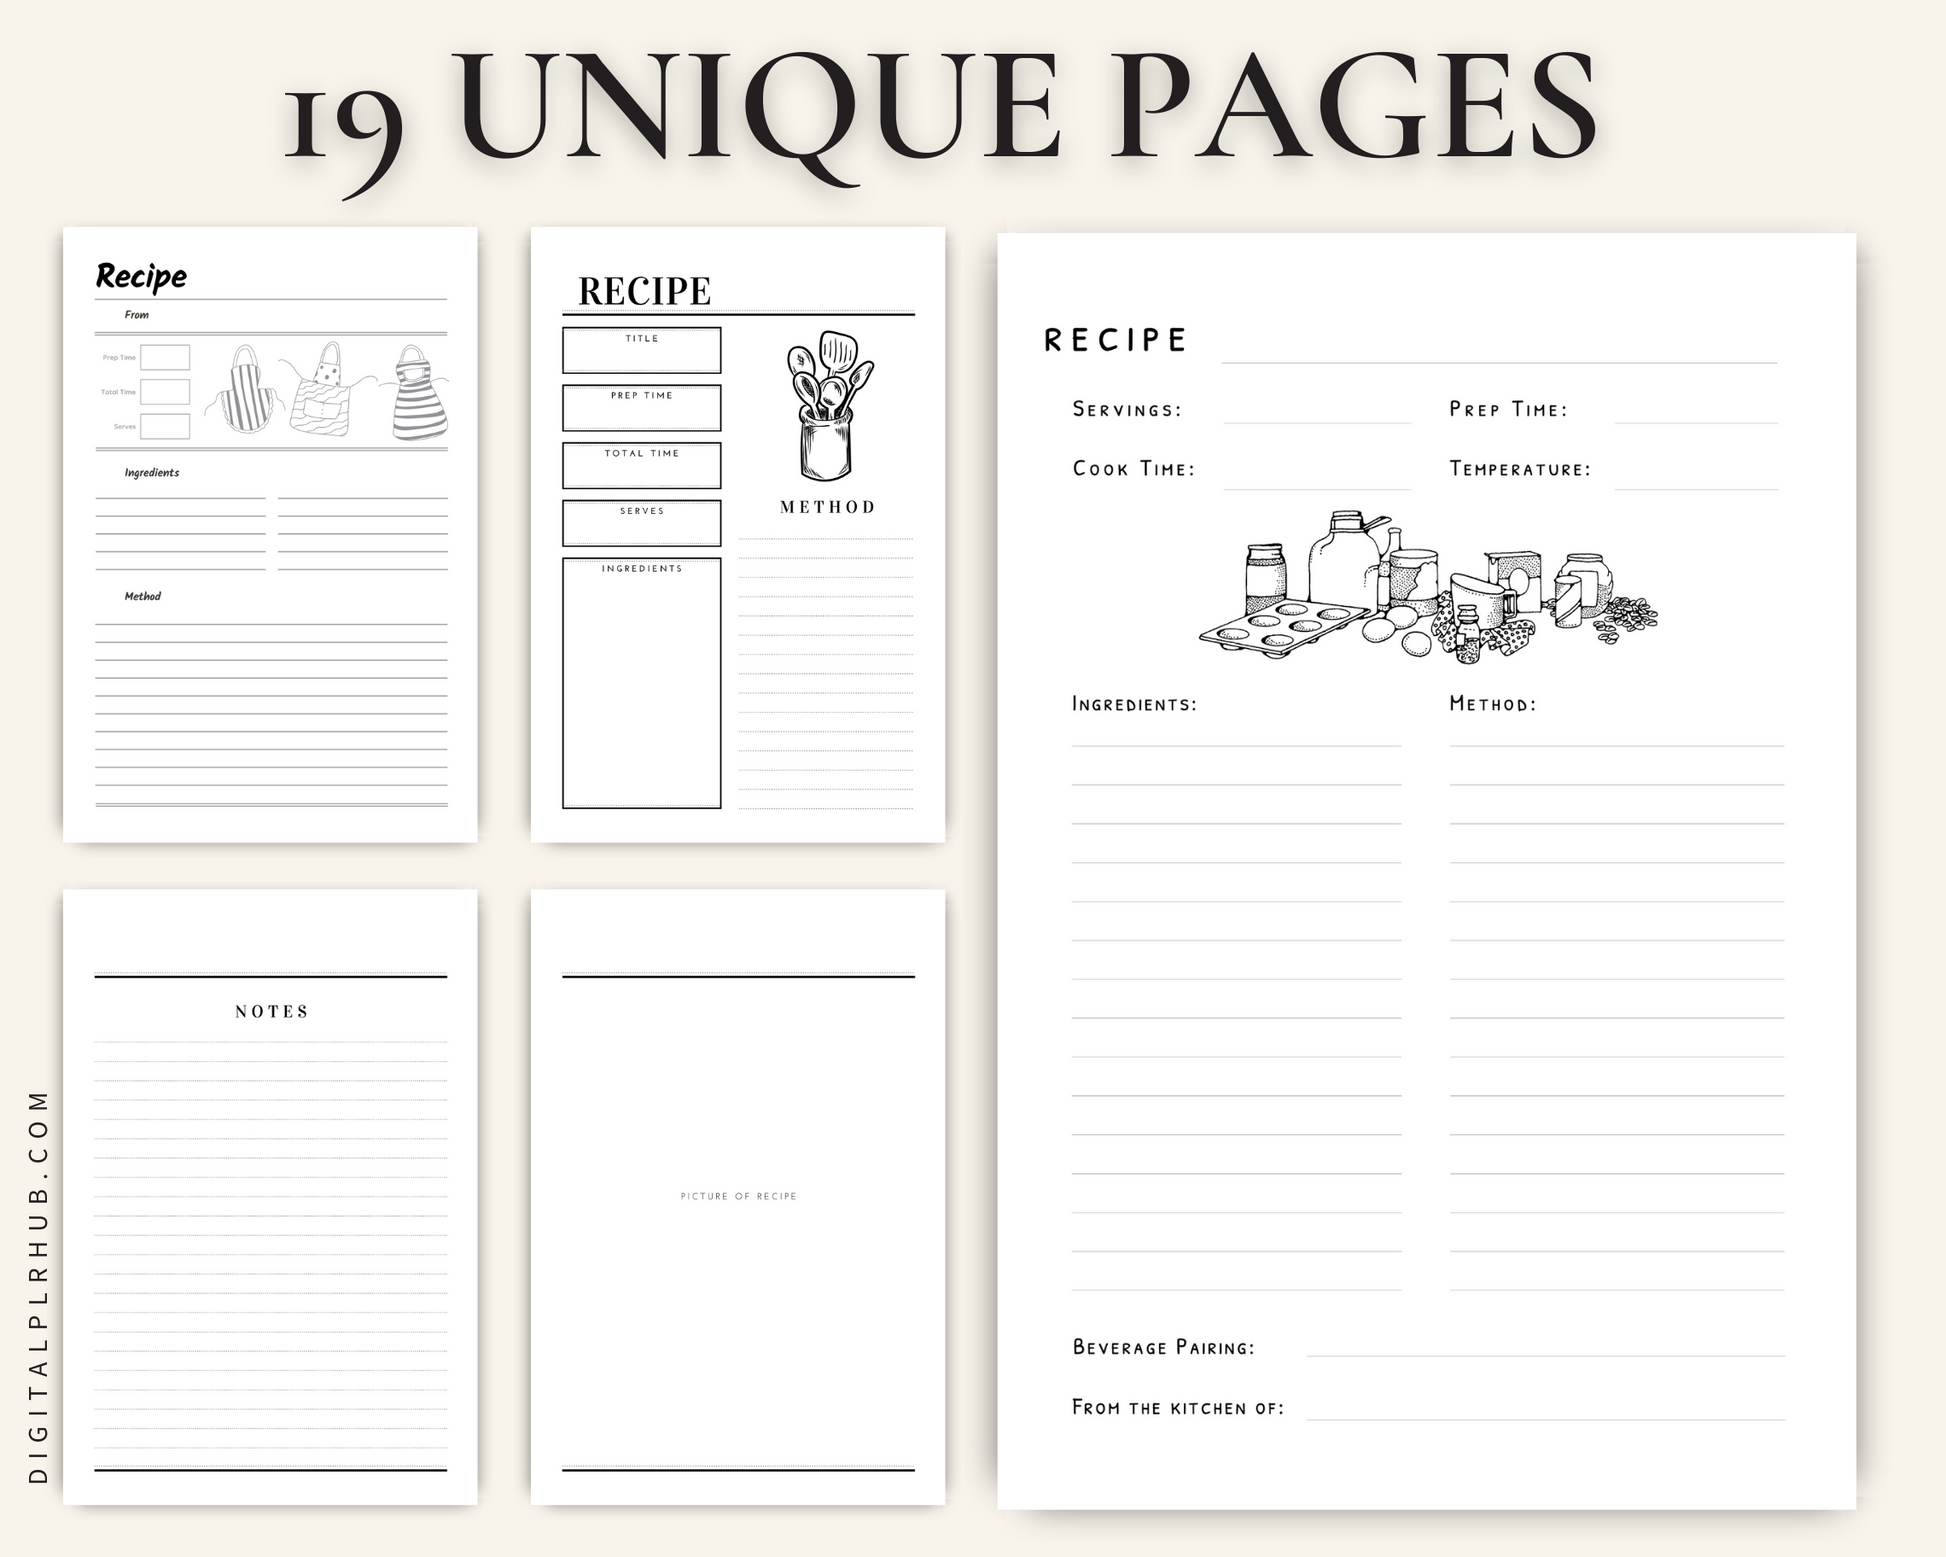 Cookbook Template, Recipe Book Template Graphic by BEST KDP